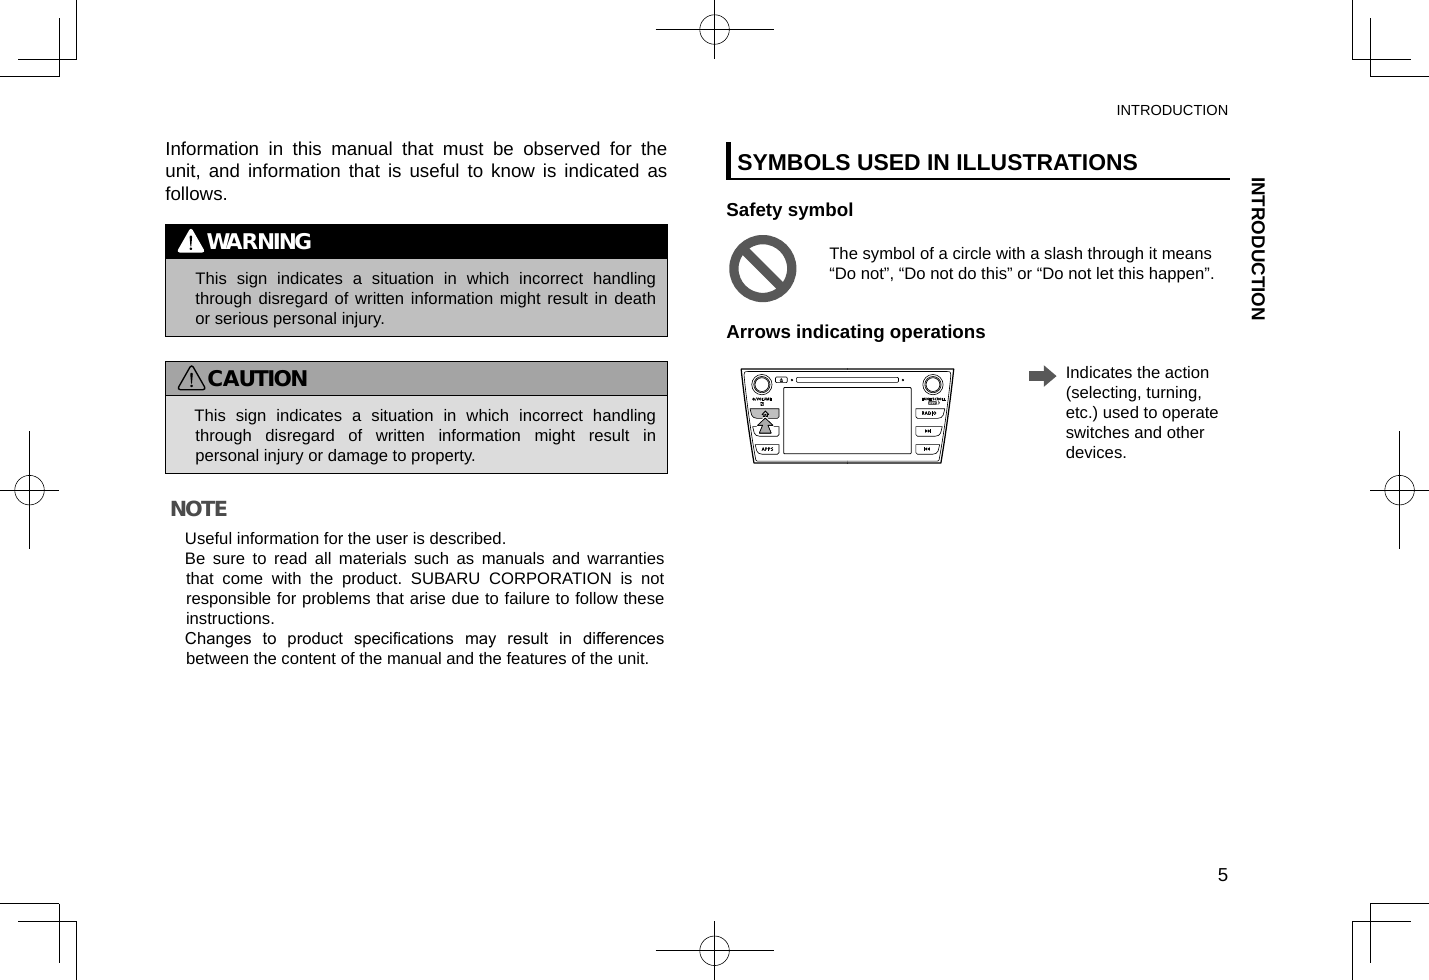 Information in this manual that must be observed for the unit, and information that is useful to know is indicated as follows.WARNING lThis sign indicates a situation in which incorrect handling through disregard of written information might result in death or serious personal injury.CAUTION lThis sign indicates a situation in which incorrect handling through disregard of written information might result in personal injury or damage to property.NOTE lUseful information for the user is described.  lBe sure to read all materials such as manuals and warranties that come with the product. SUBARU CORPORATION is not responsible for problems that arise due to failure to follow these instructions. lChanges  to  product  specications  may  result  in  differences between the content of the manual and the features of the unit.SYMBOLS USED IN ILLUSTRATIONSSafety symbolThe symbol of a circle with a slash through it means “Do not”, “Do not do this” or “Do not let this happen”.Arrows indicating operations    Indicates the action (selecting, turning, etc.) used to operate switches and other devices.INTRODUCTIONINTRODUCTION5